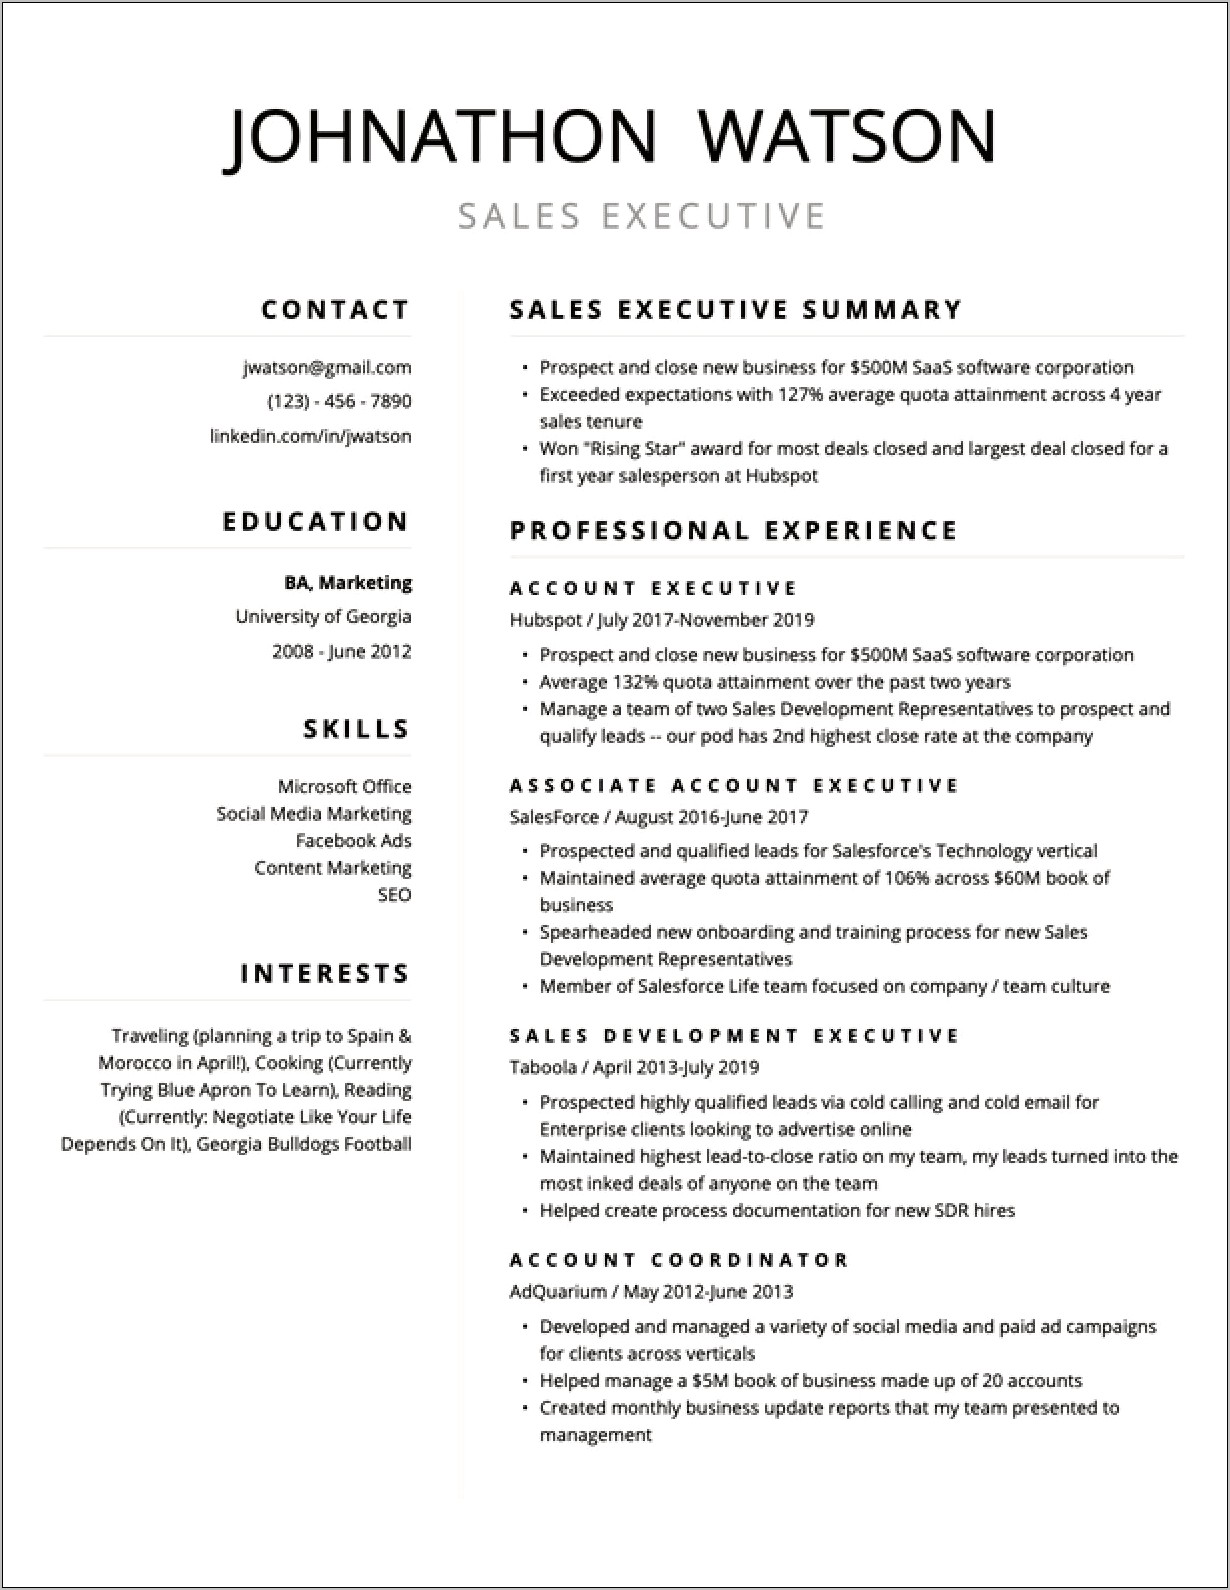 Send Your Resume In Word Format